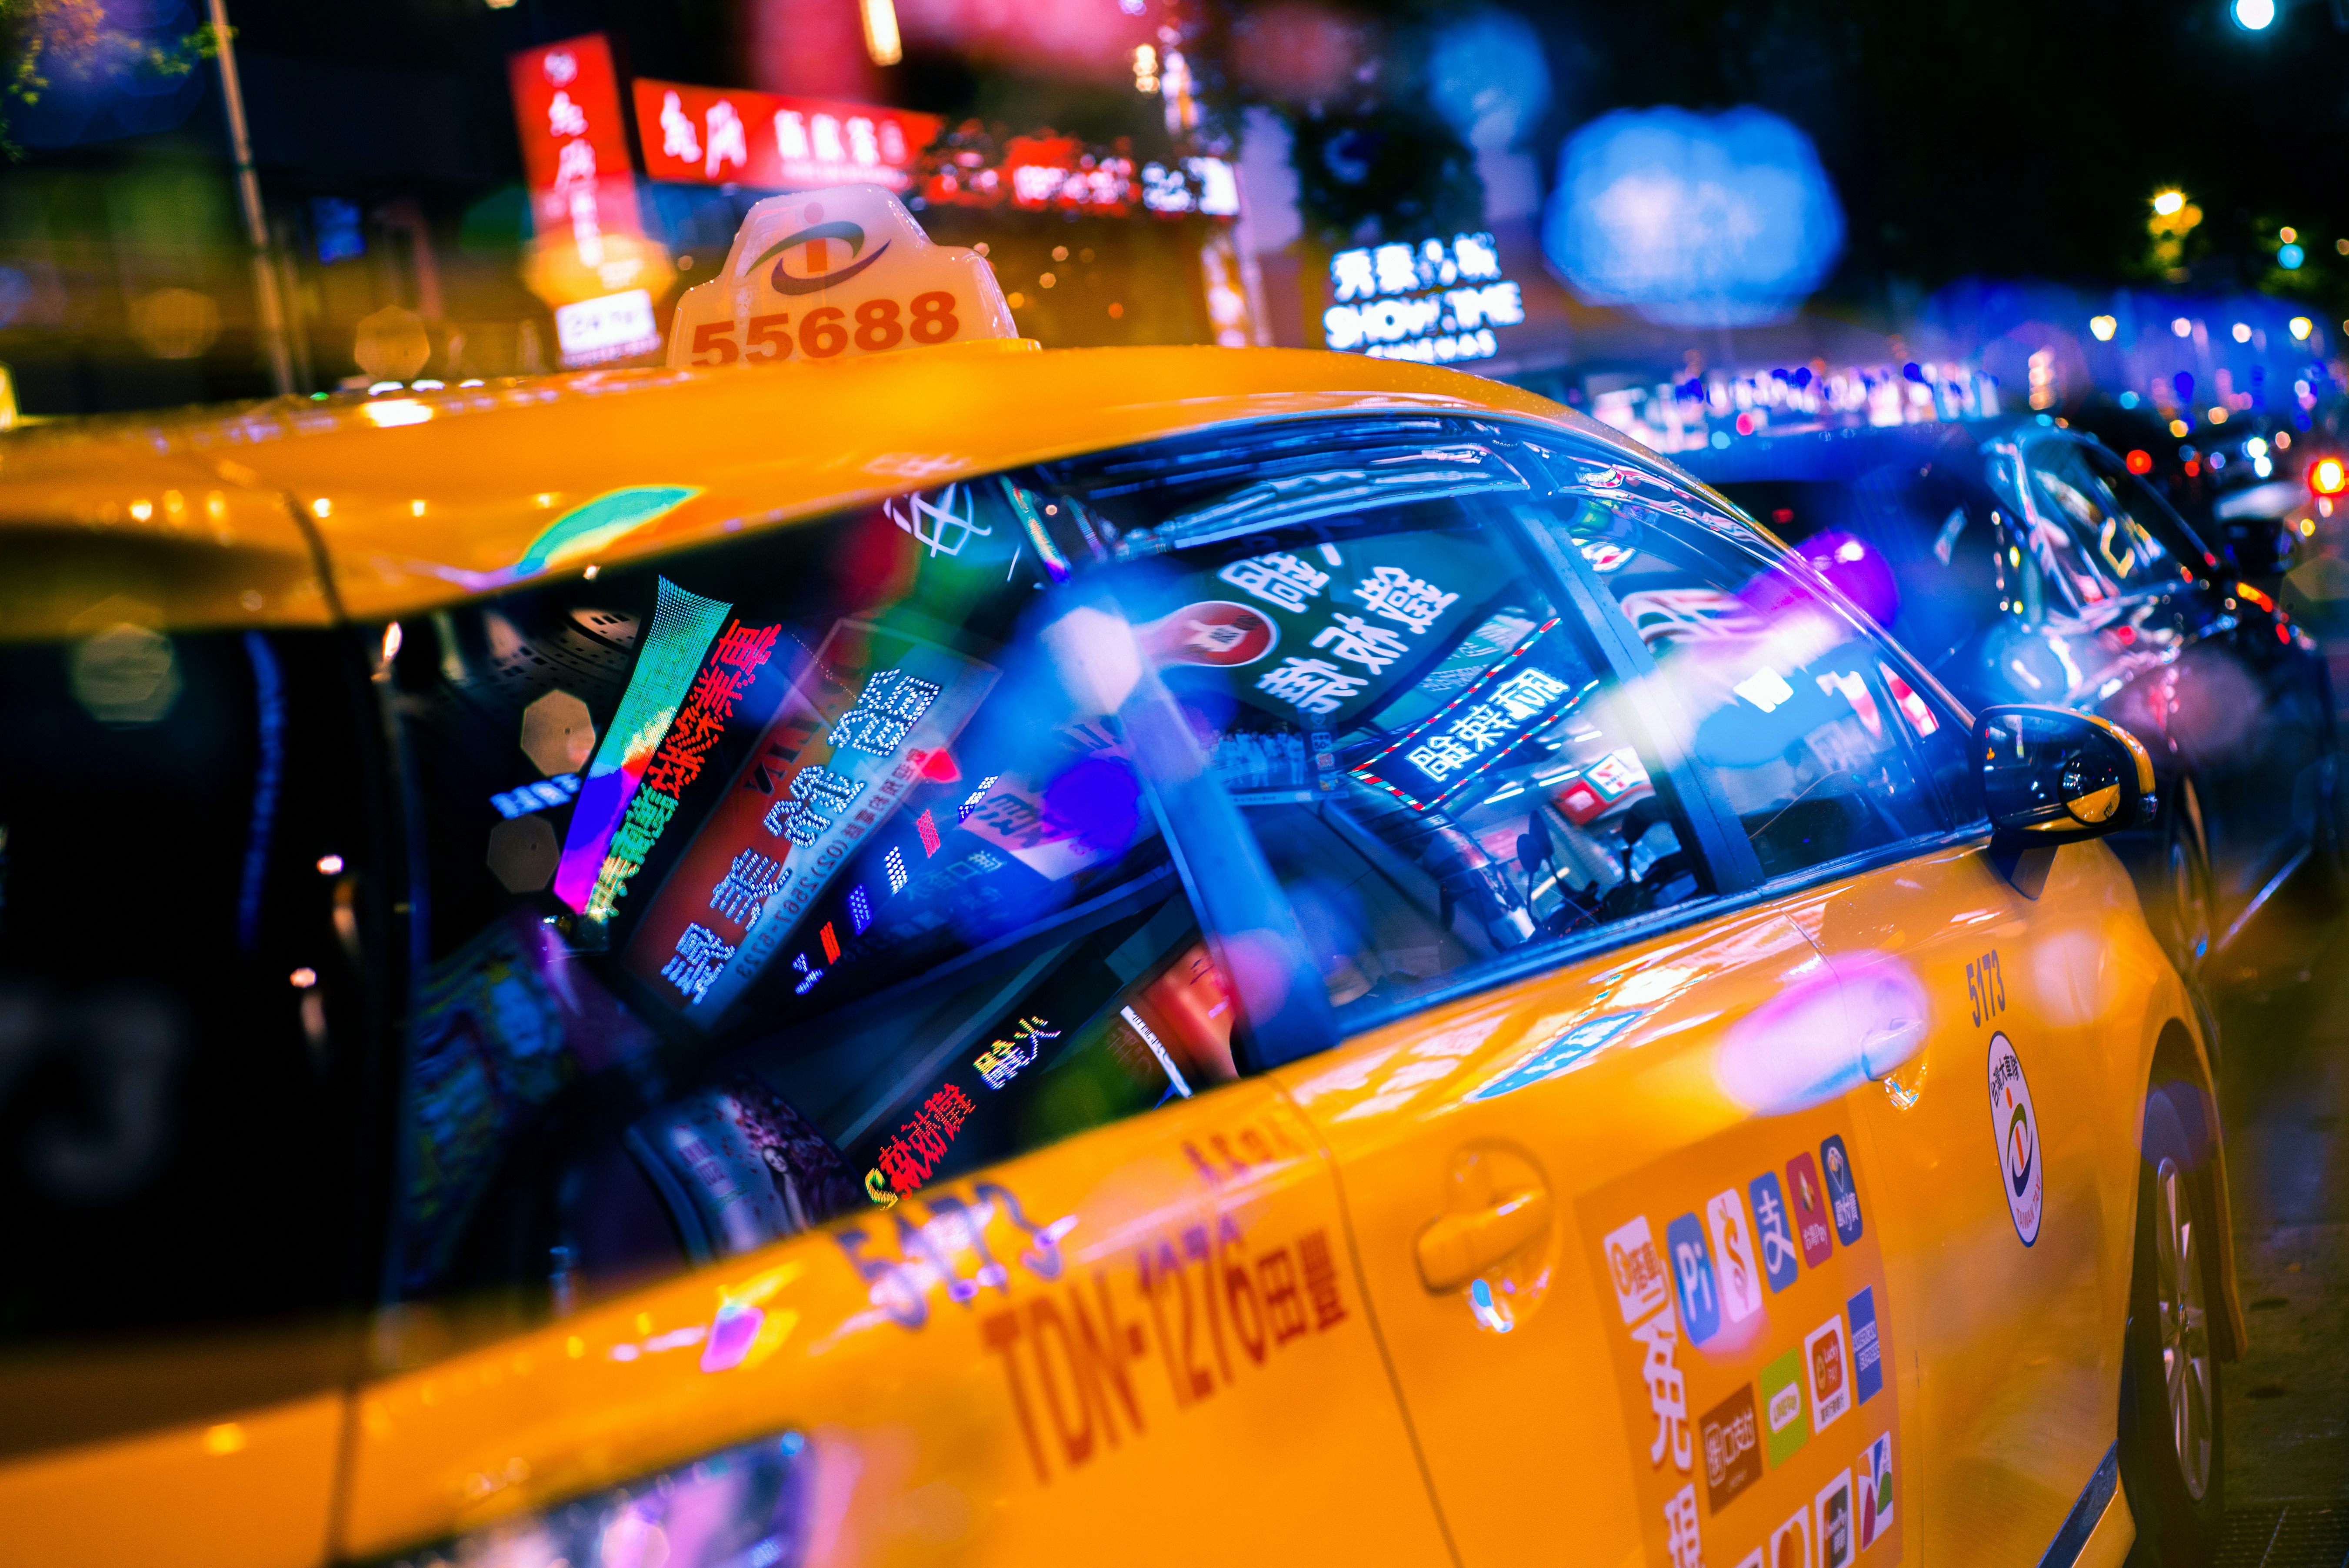 yellow taxi cab on street during night time